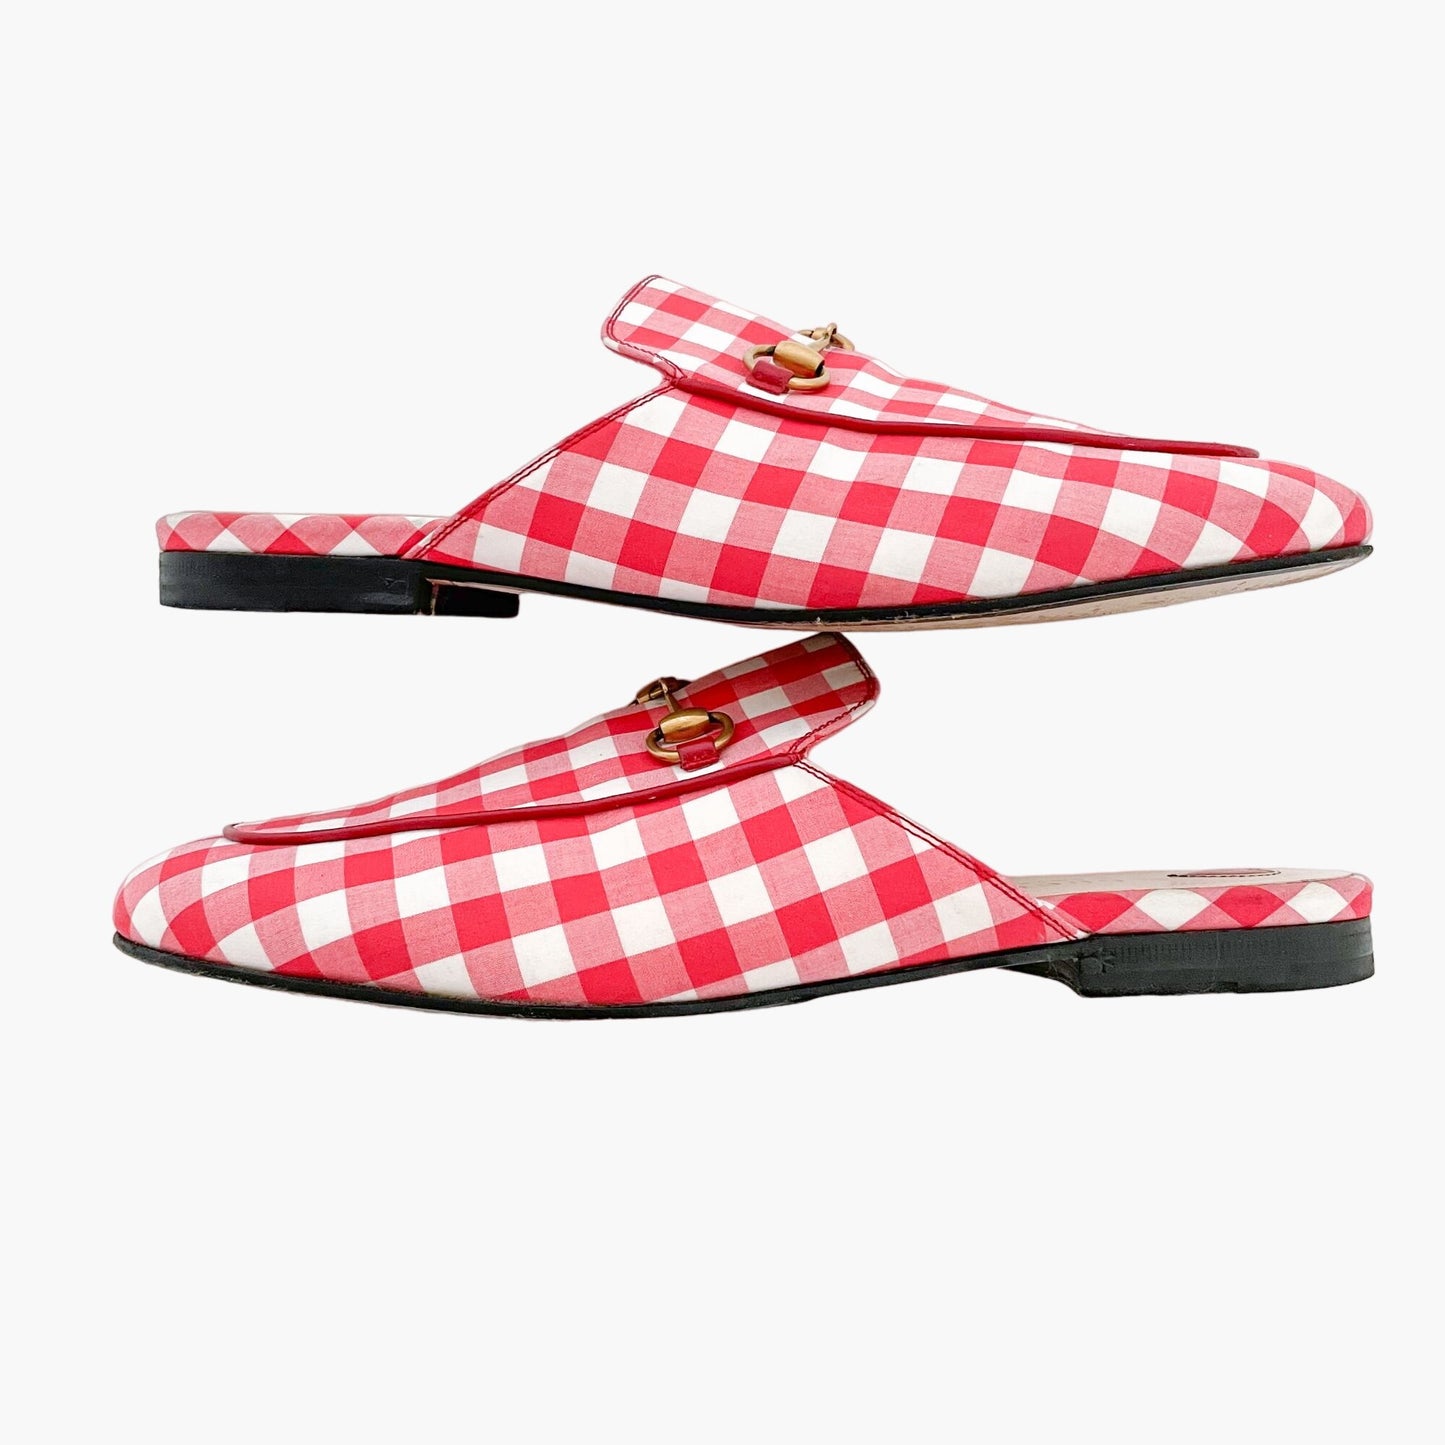 Gucci Princetown Slipper in Red & White Gingham Size 39.5